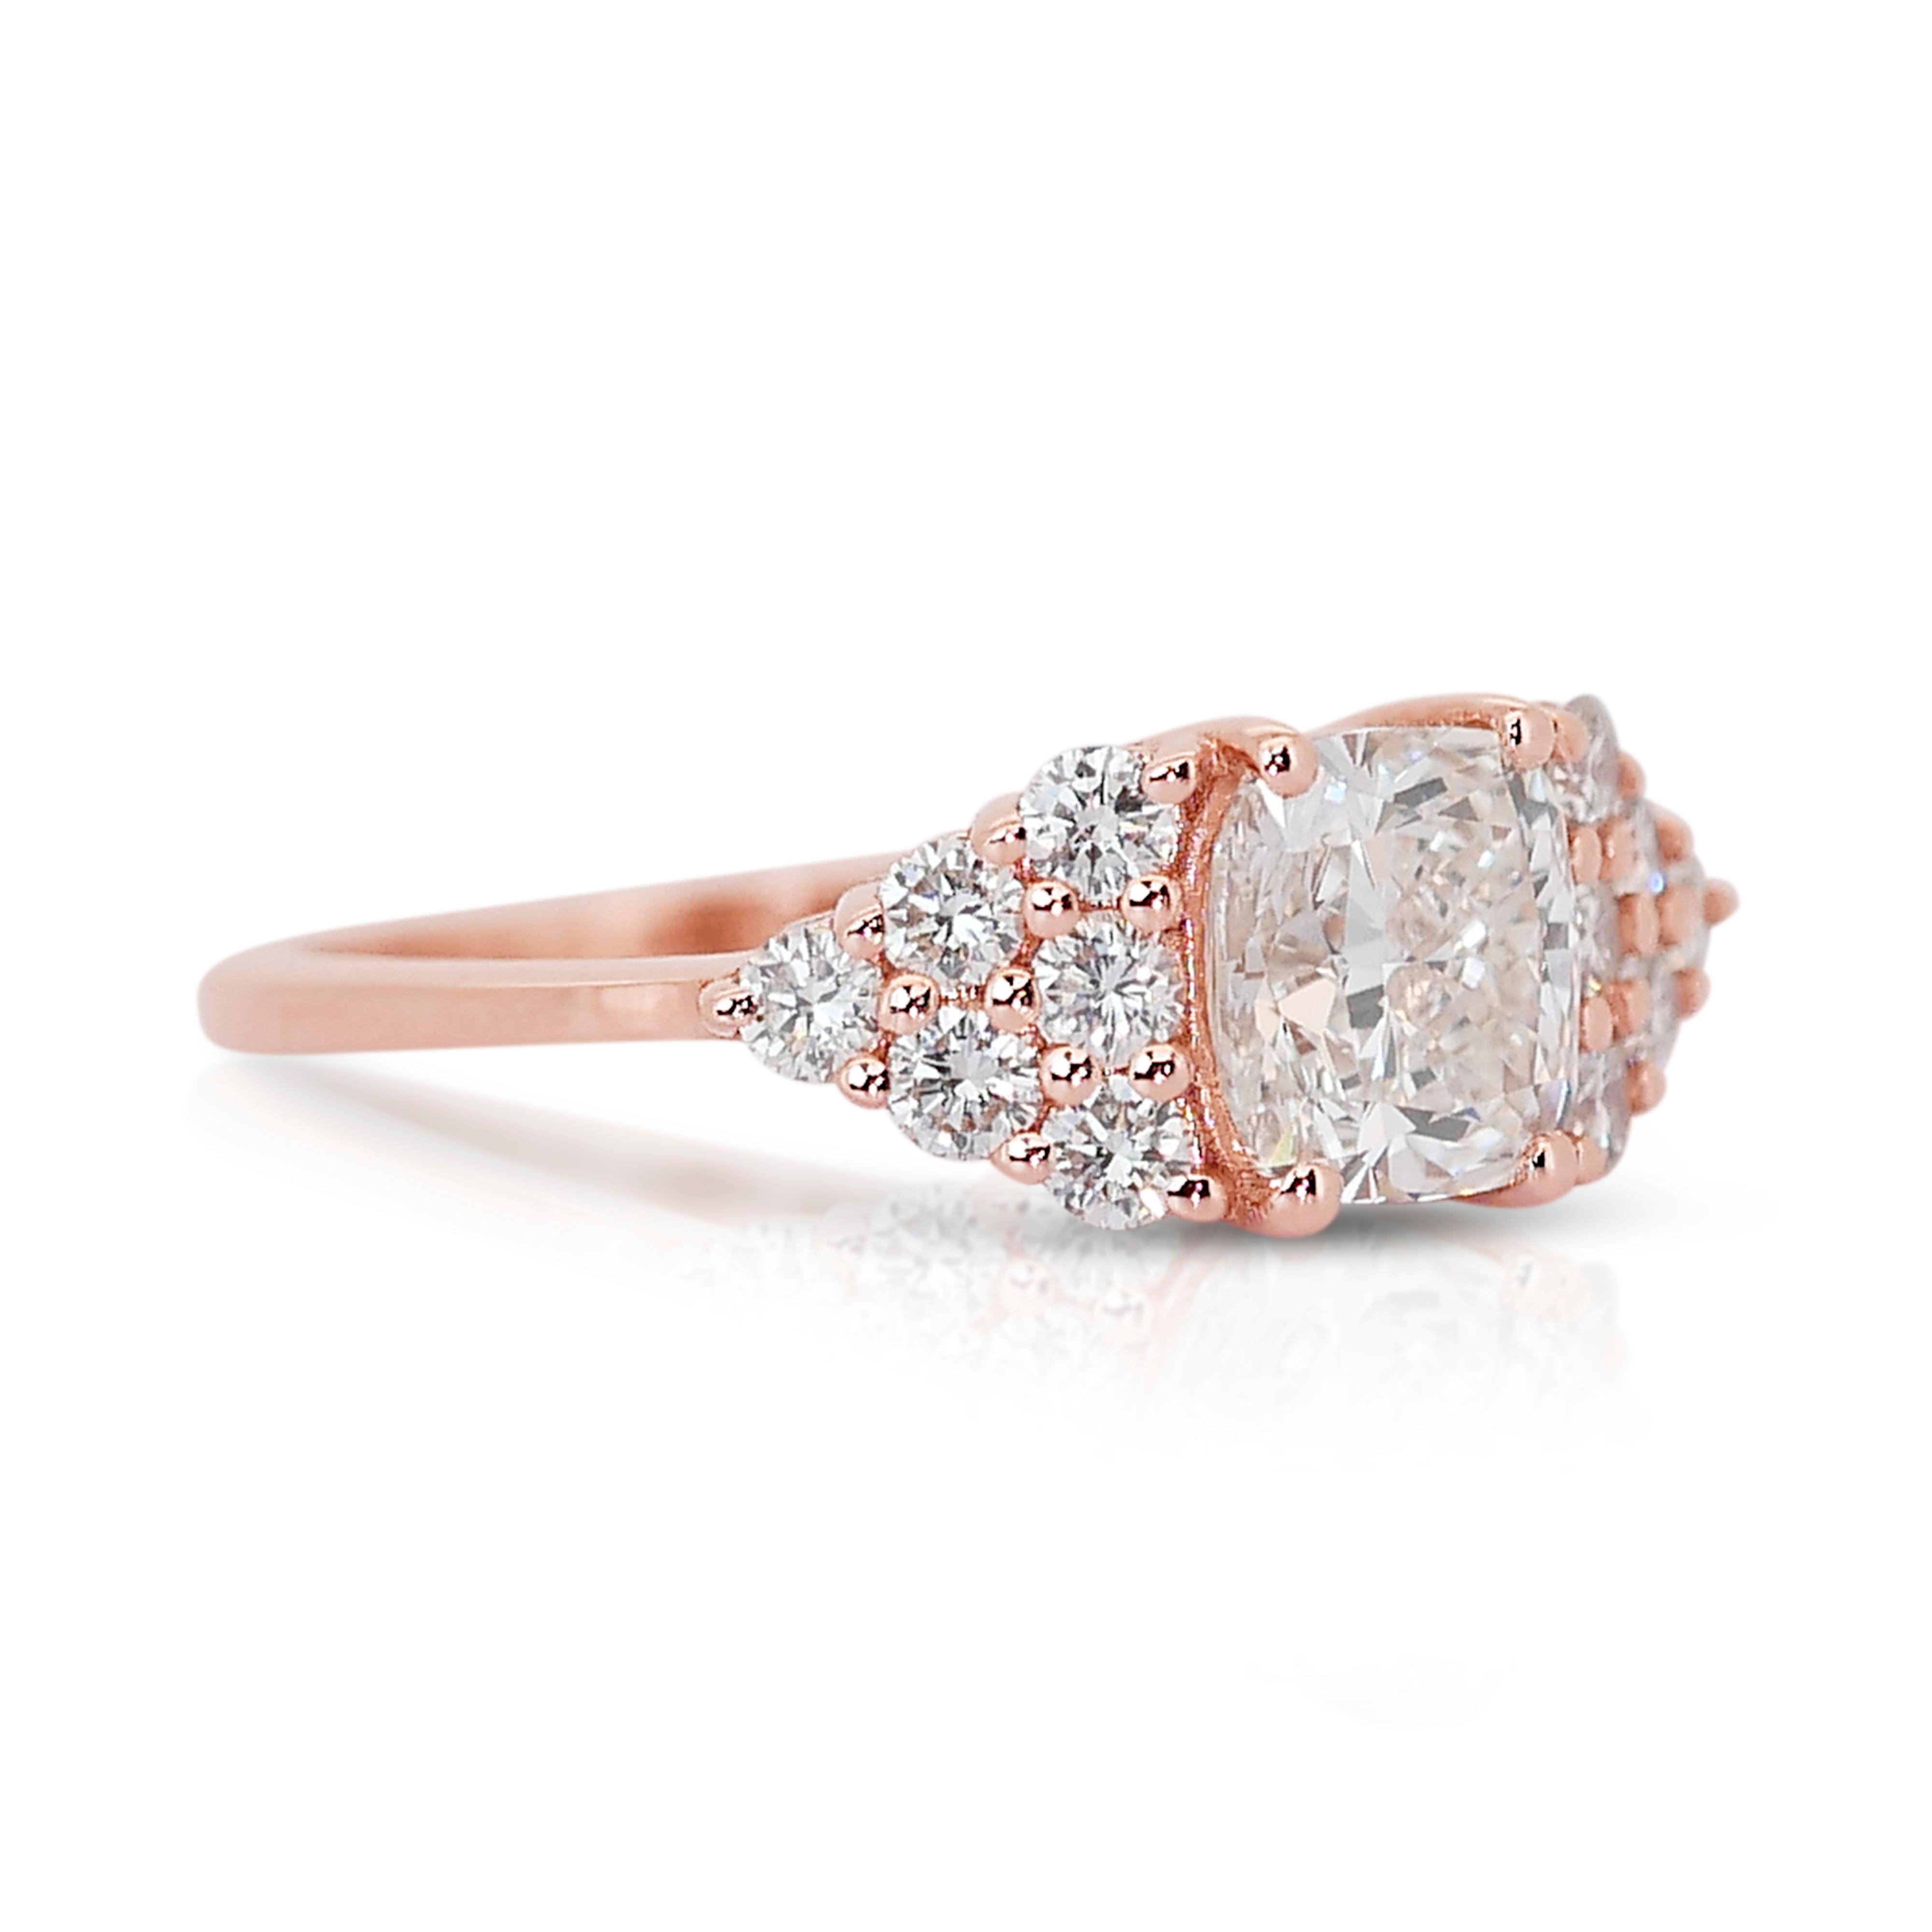 Lovely 1.65ct Diamonds Pave Ring in 14k Rose Gold - IGI Certified

This exquisite pave ring in 14k rose gold features a stunning 1.20-carat cushion cut diamond, brilliantly capturing light with its perfect cut and displaying a beautiful color and